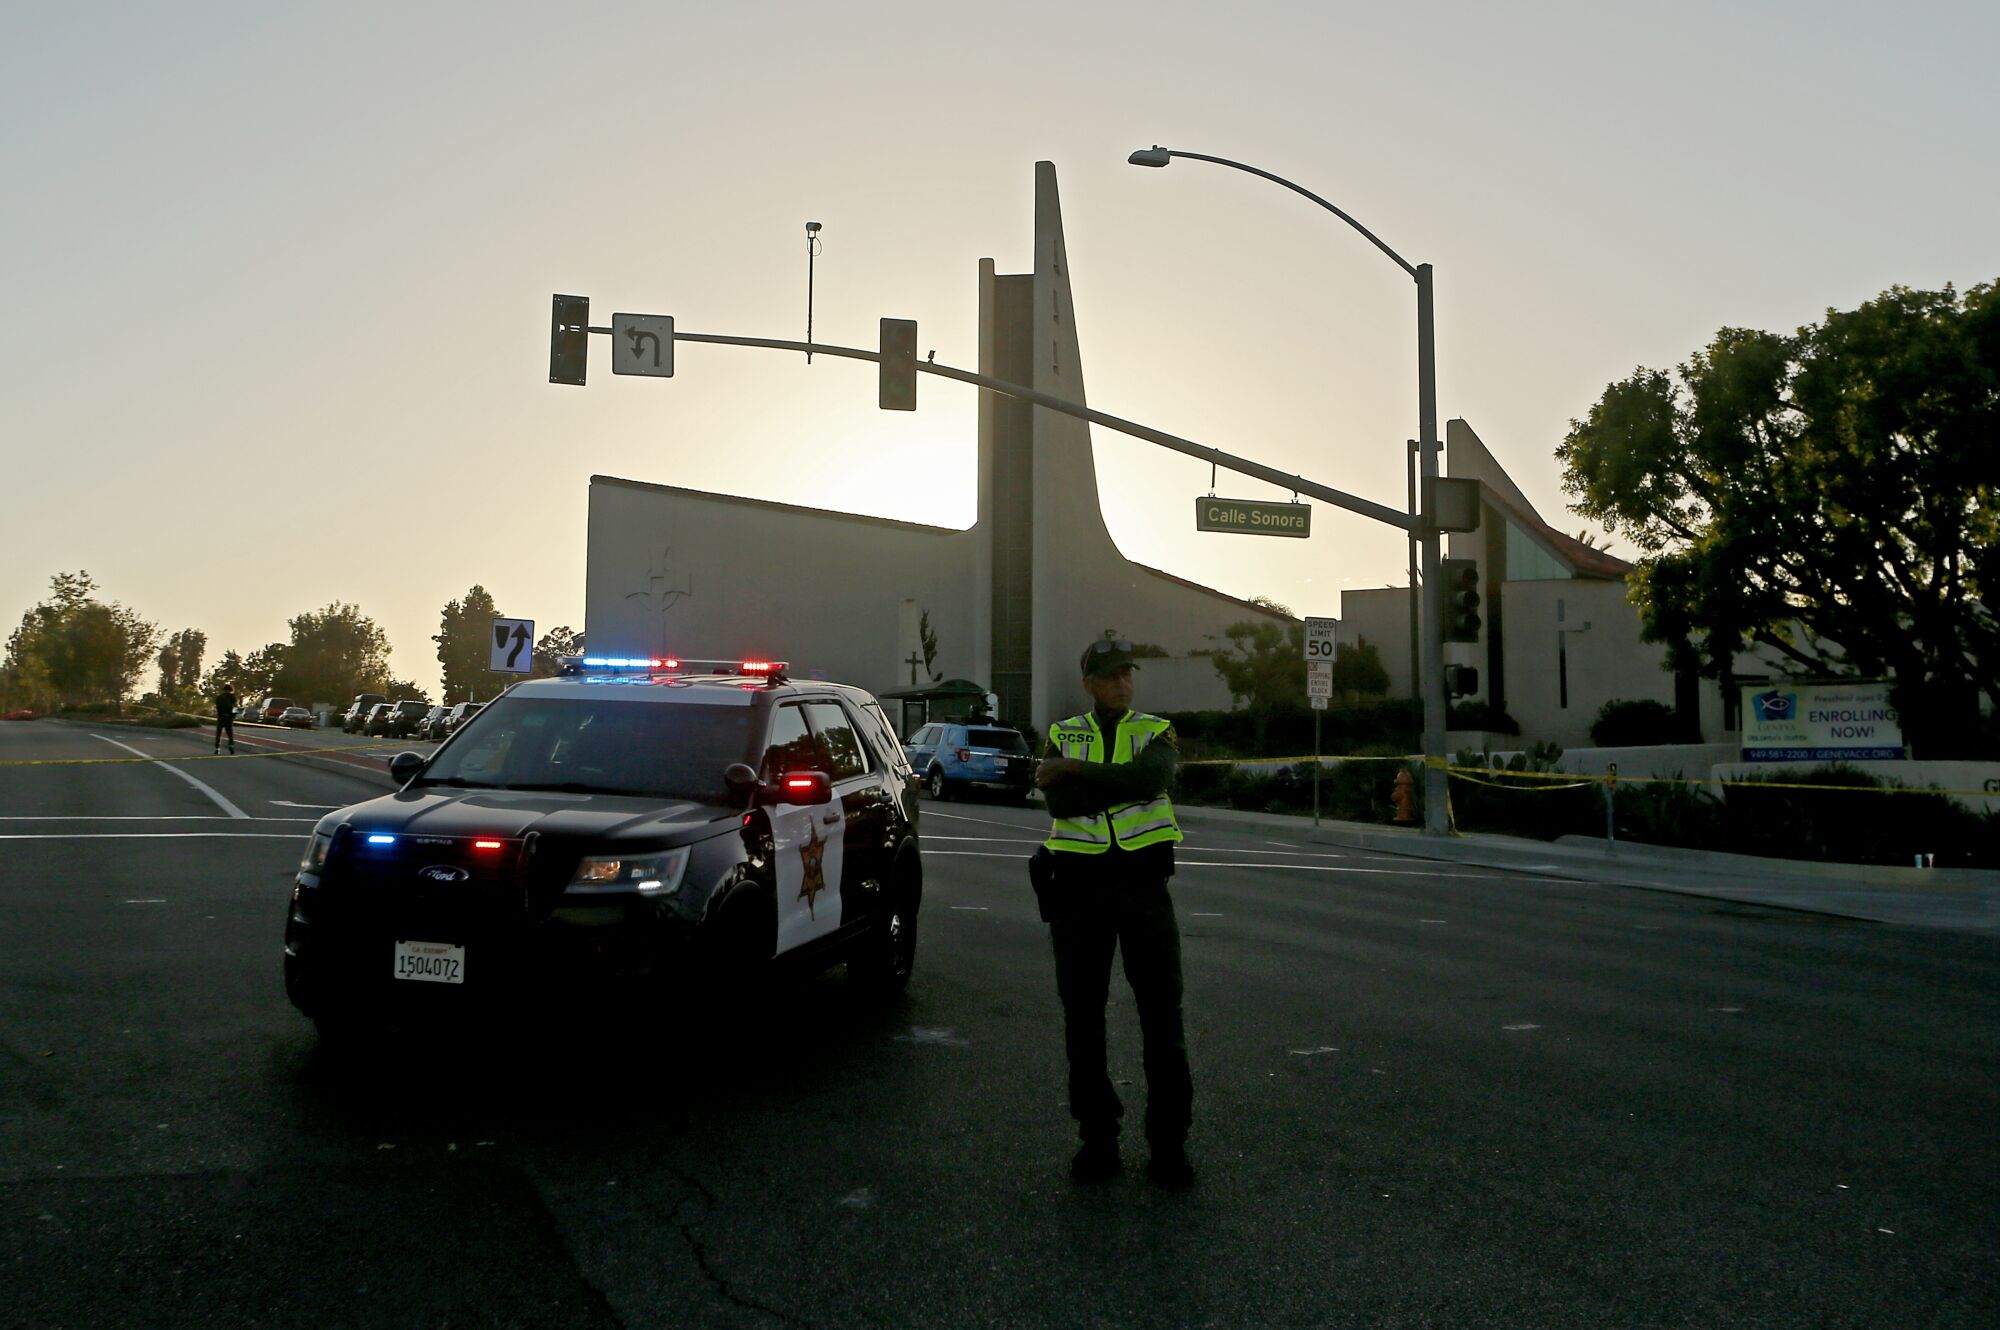 A sheriff's deputy standing beside a vehicle outside the church